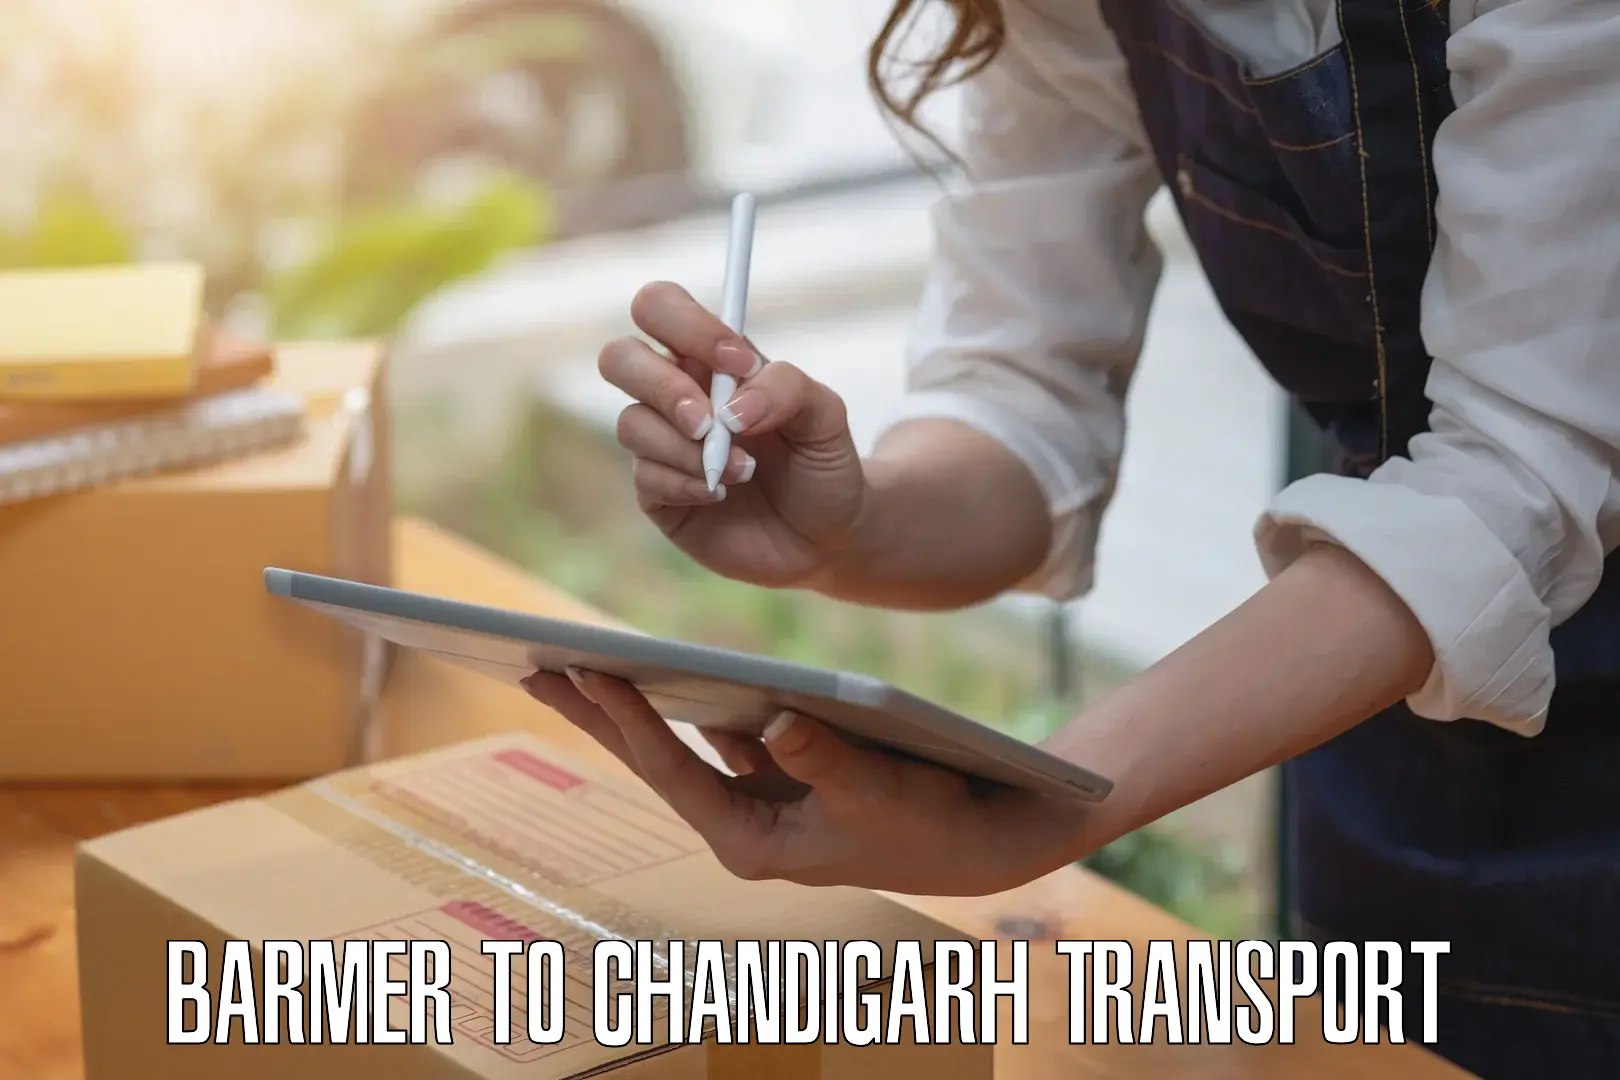 Cycle transportation service Barmer to Chandigarh